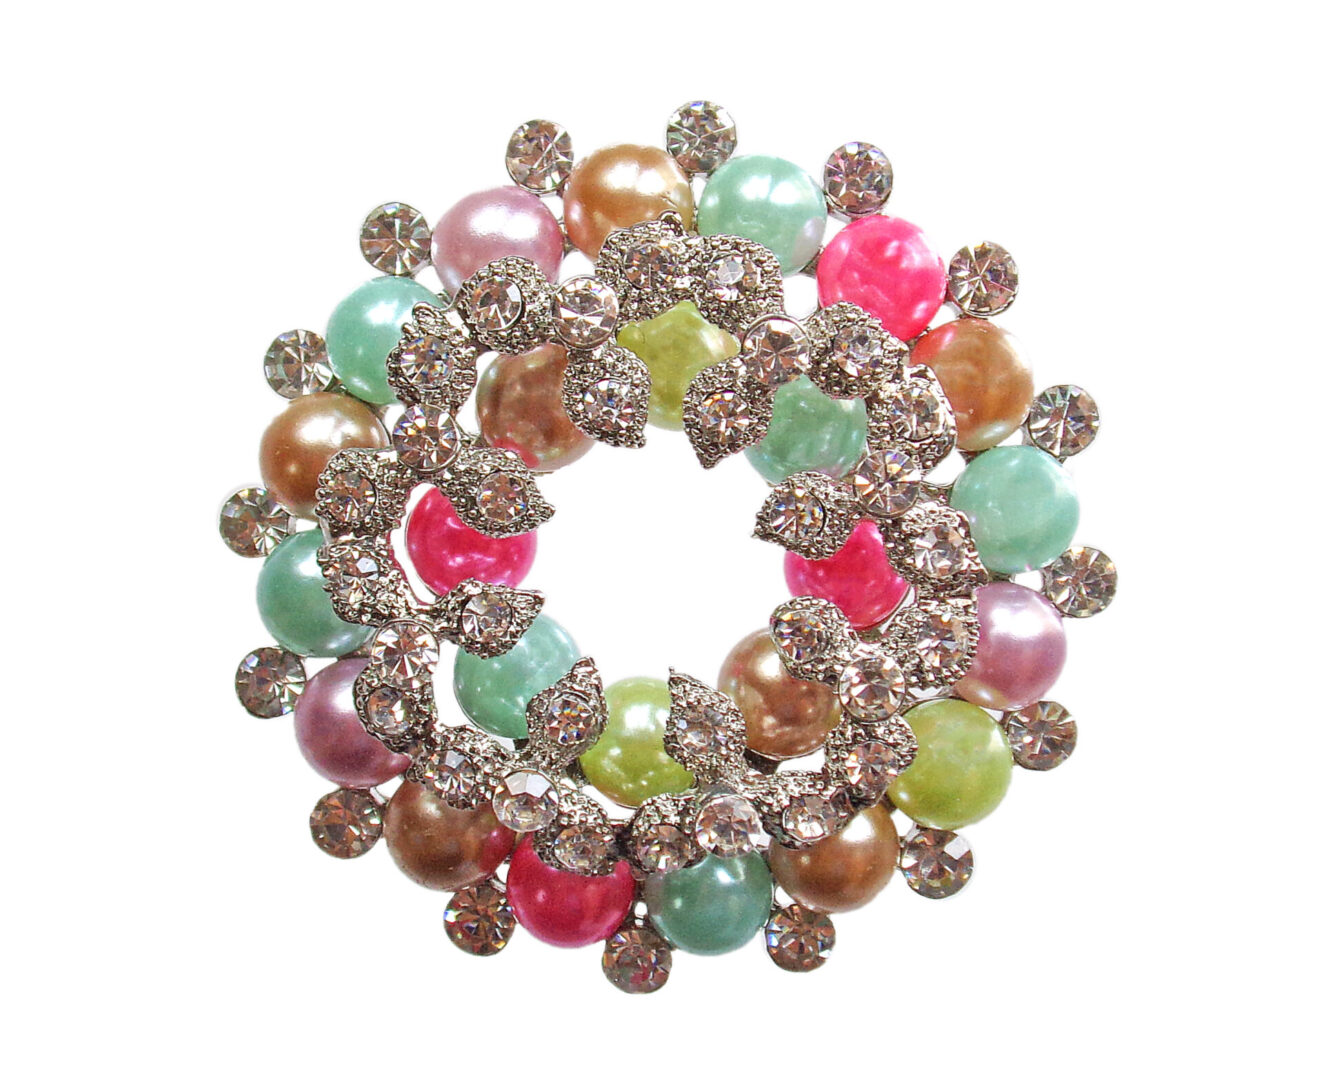 A colorful bracelet made using pearls and gems